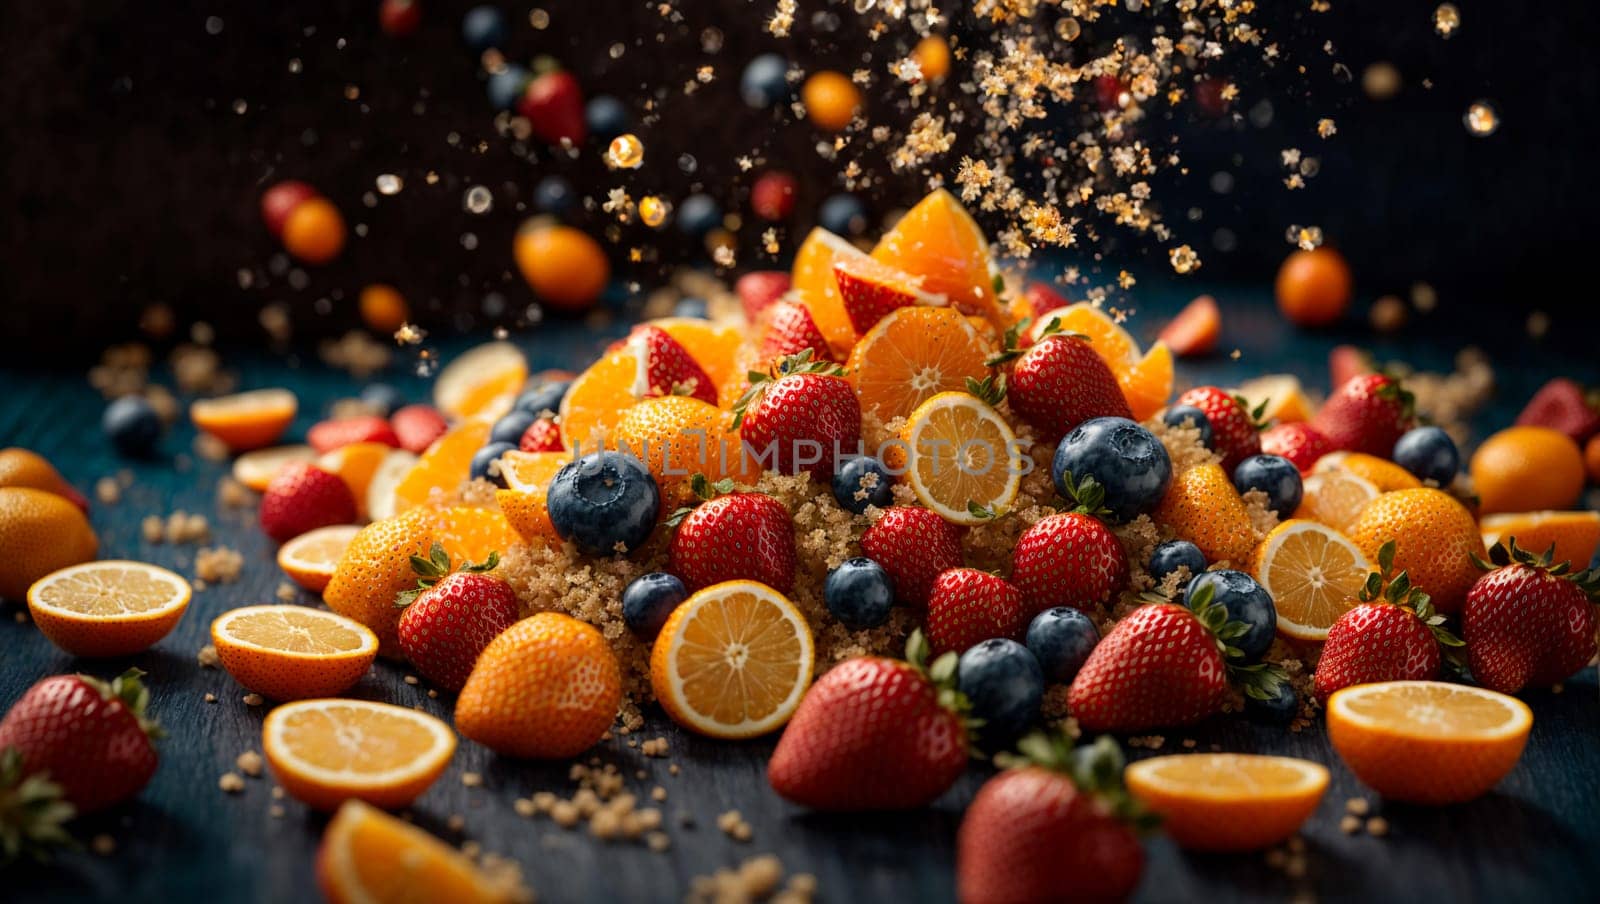 an explosion of bright colors, orange and strawberry floating in the air, in splashes of water, leaving a delightful trail against a background of deep dark blue and mesmerizing magical blue and white shades.